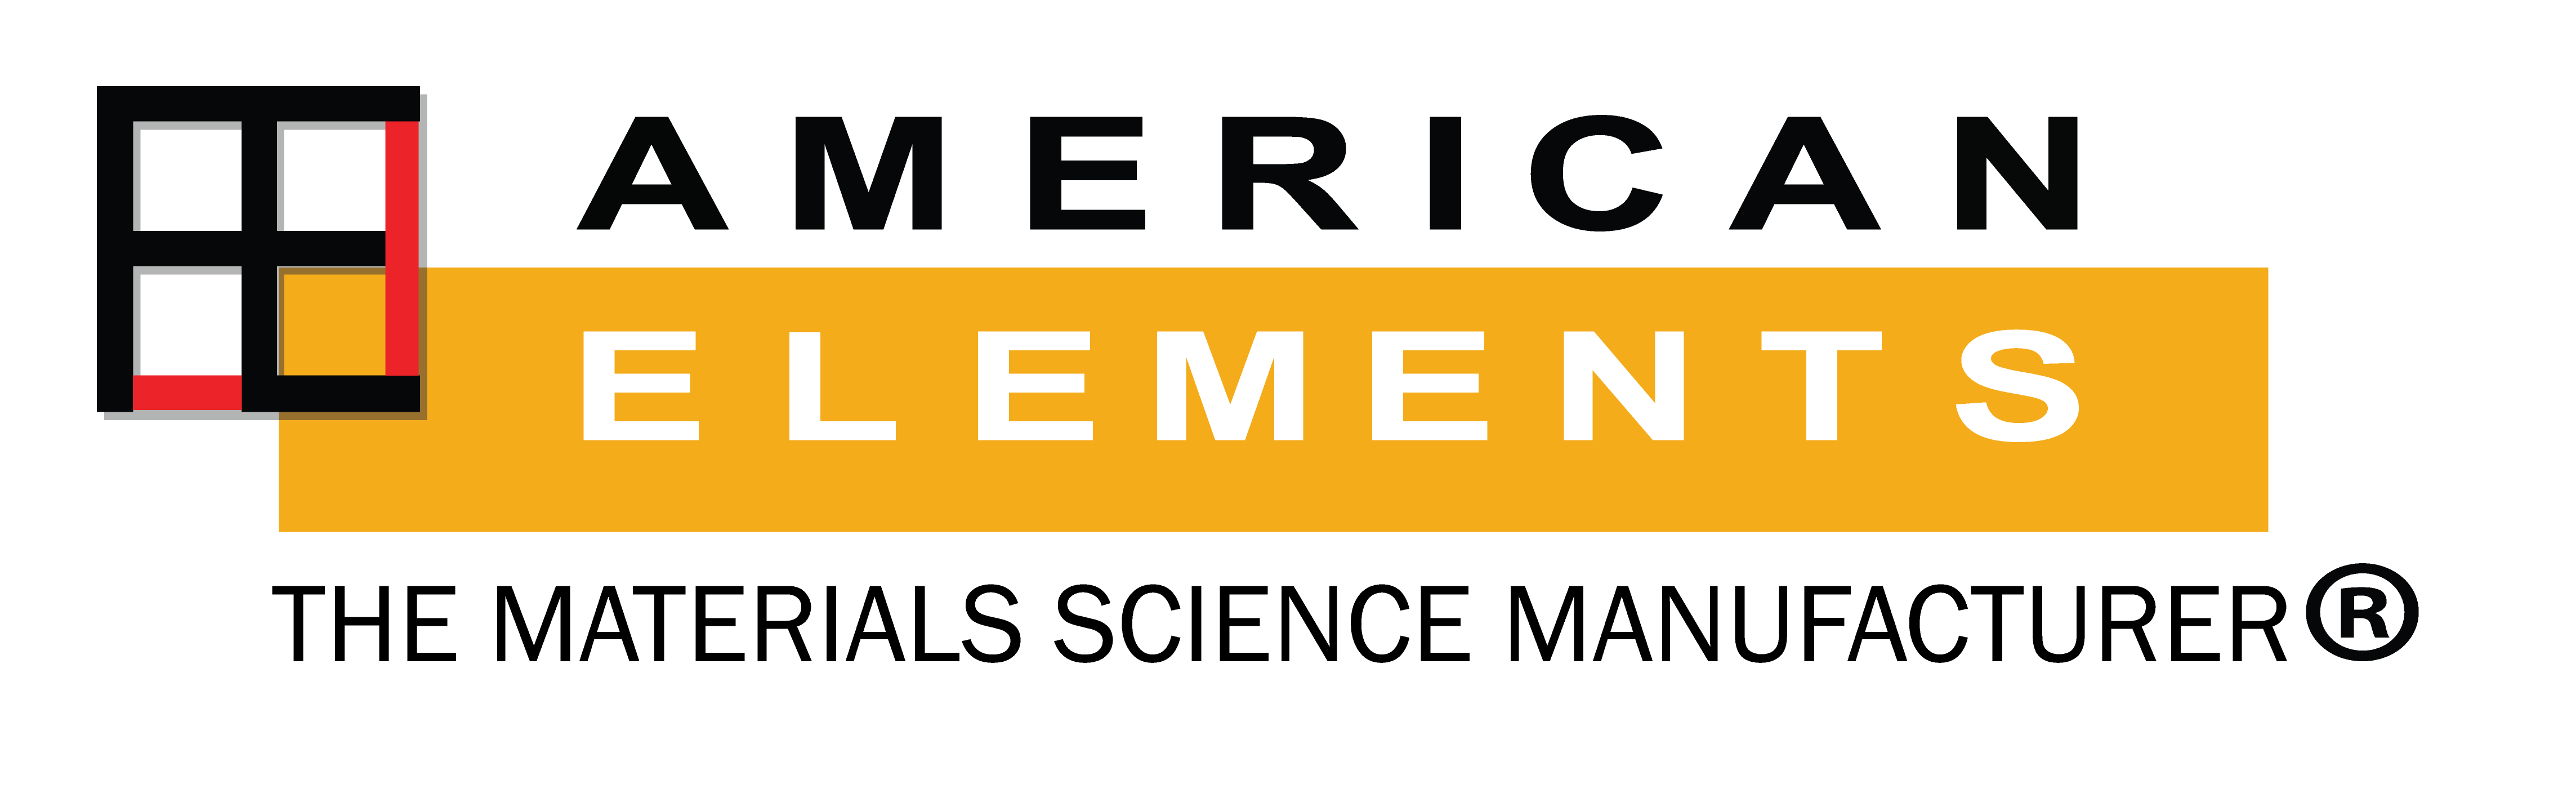 American Elements, global manufacturer of high purity chemicals & reagents for process development and R&D in the pharmaceutical, engineering, biotech & chemical manufacturing industries